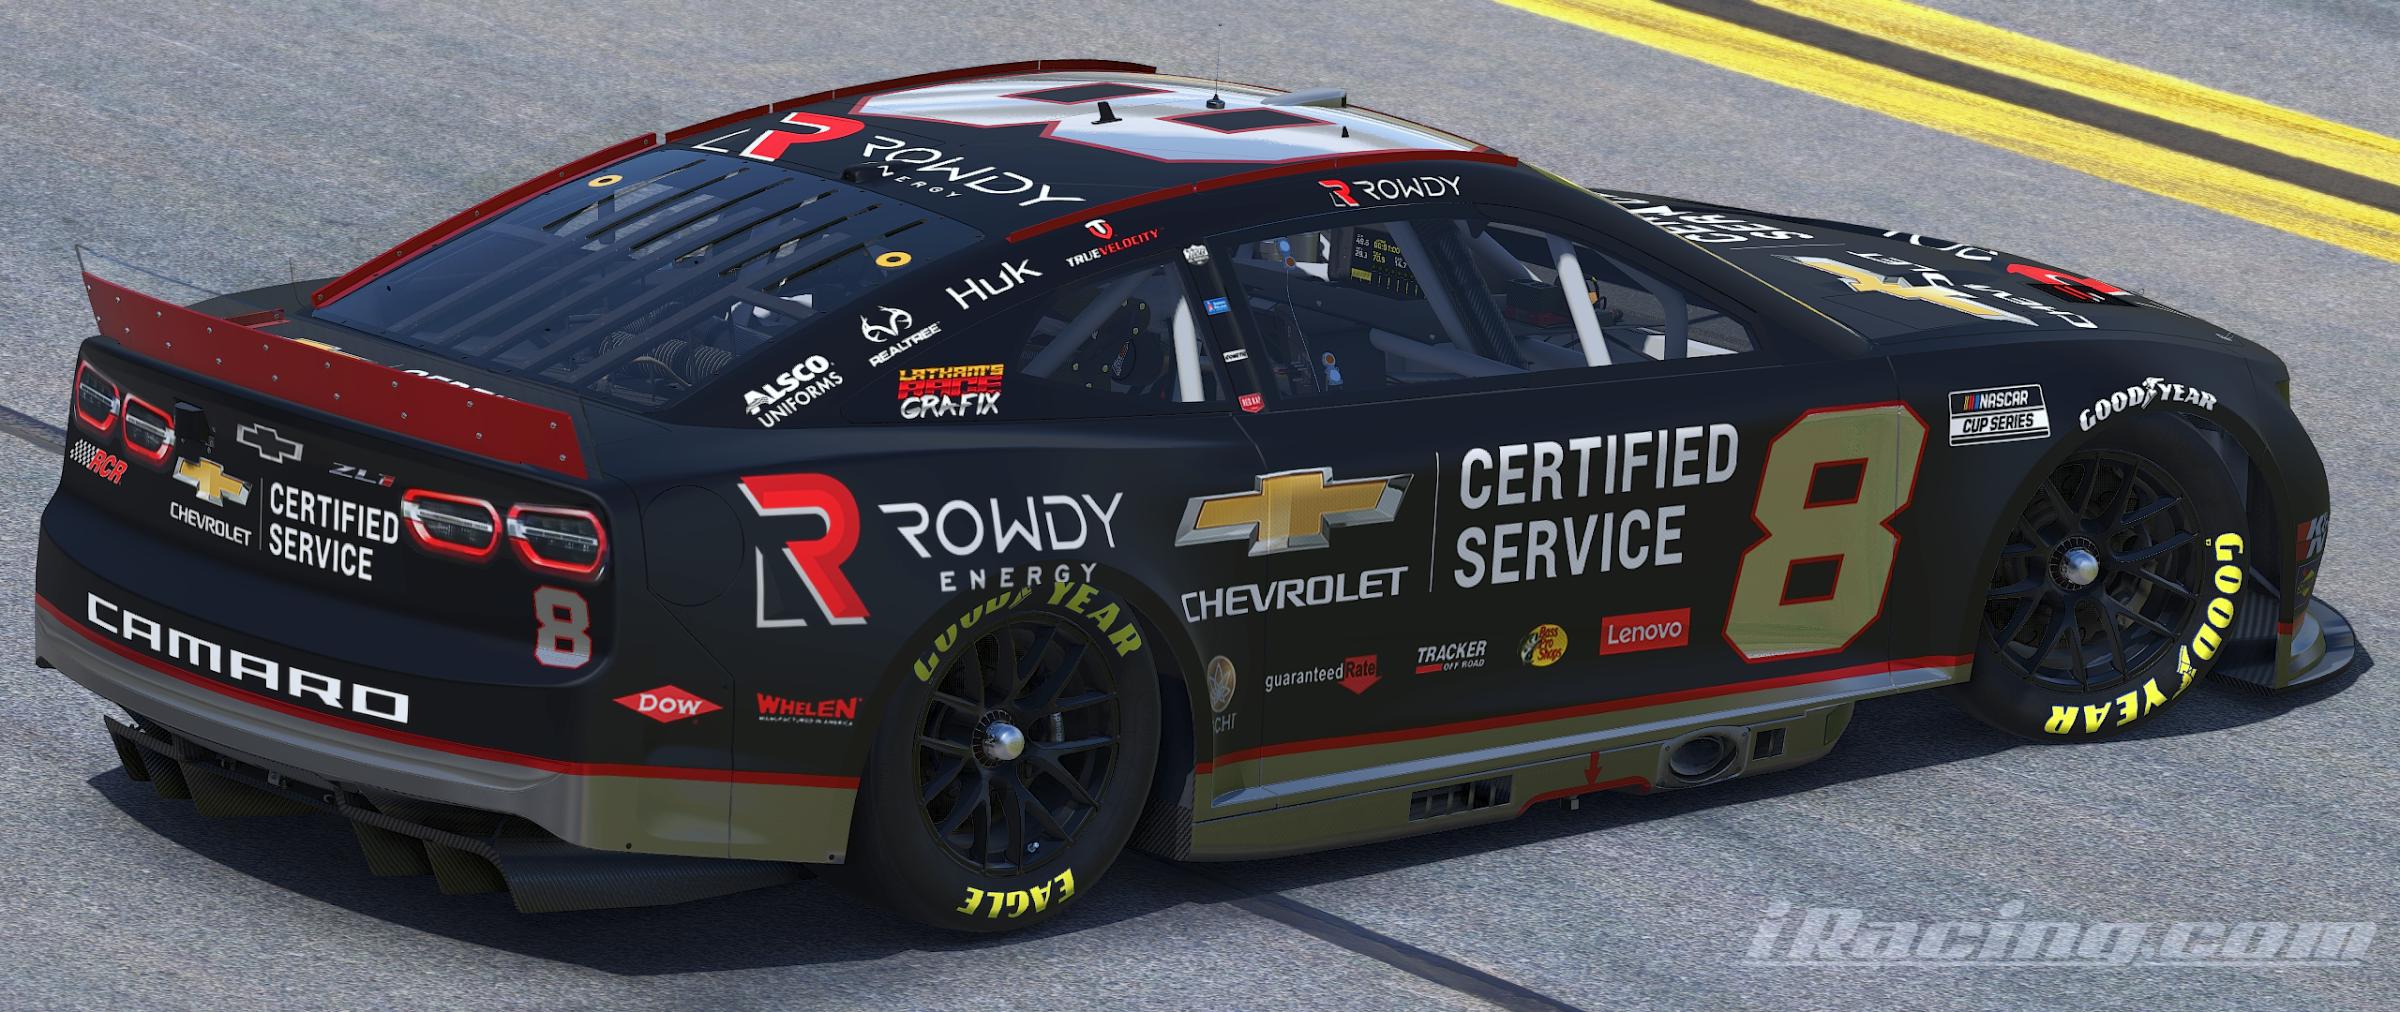 Preview of 2023 - Kyle Busch Chevrolet Certified Service / Rowdy Energy Chevrolet Camaro Concept by Timothy Latham